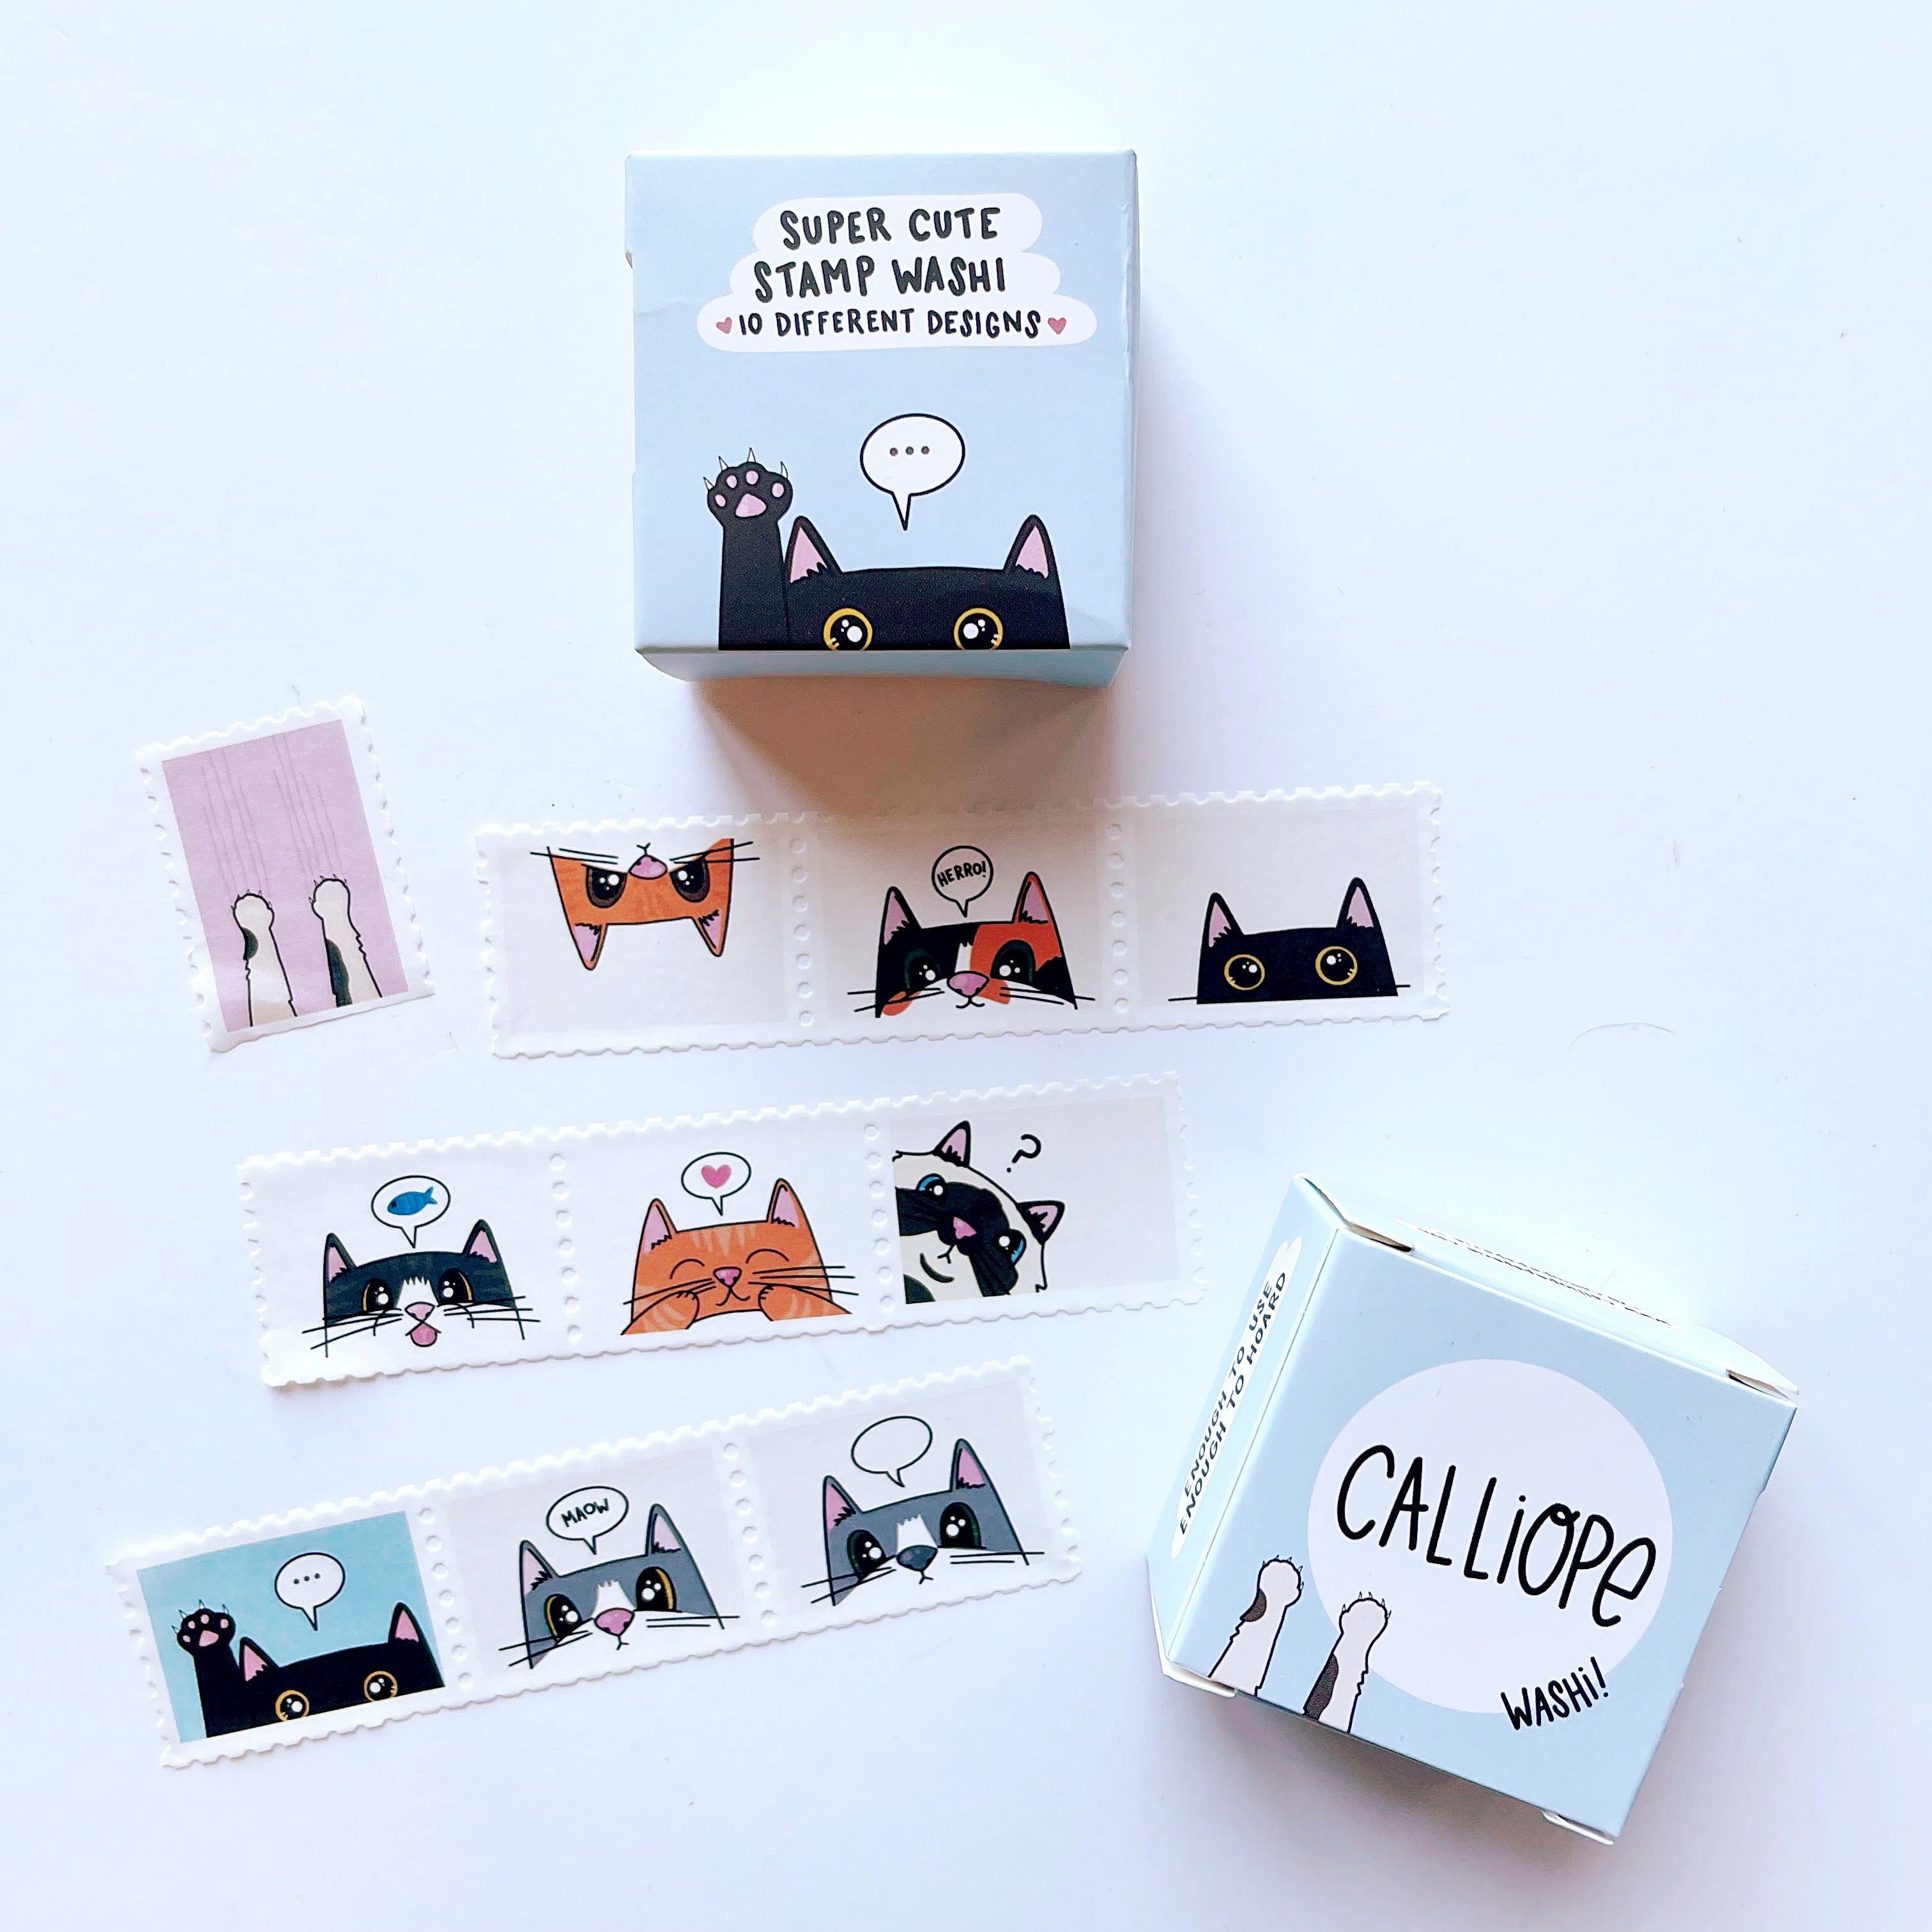 Image of stamp Washi tape with images of cats faces from the nose up with word bubbles with black text says, "meow" or has images of fish, hearts or "...". 